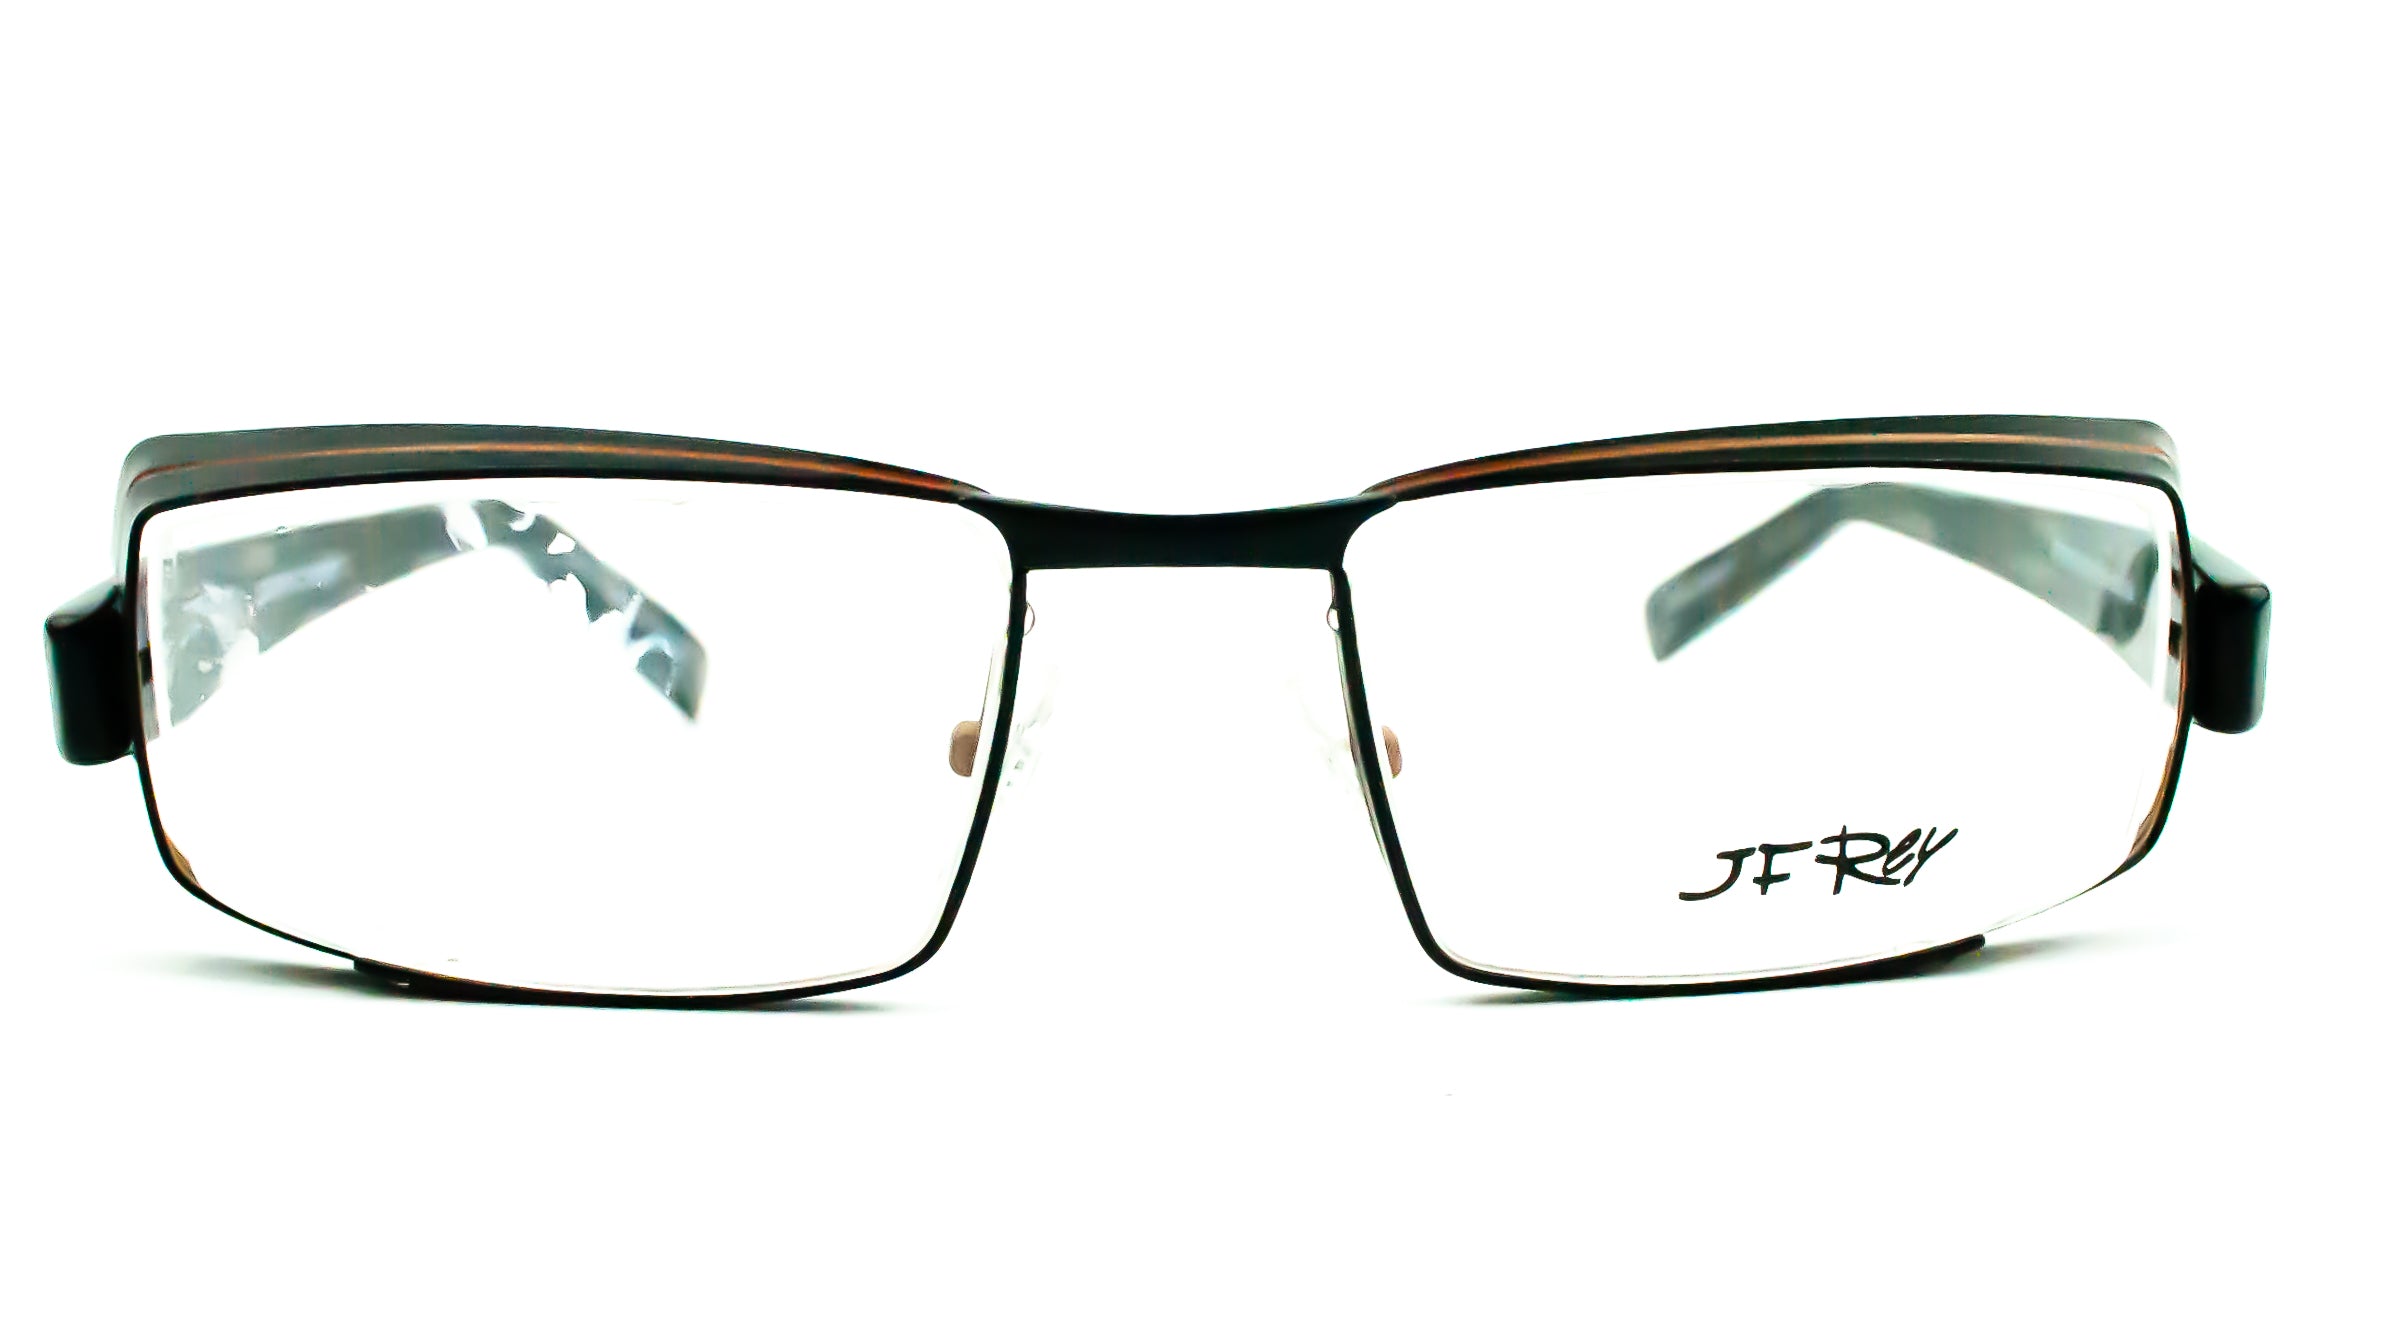 JF Rey Model 2372 Brown and Black Col.0092 Rectangle Glasses